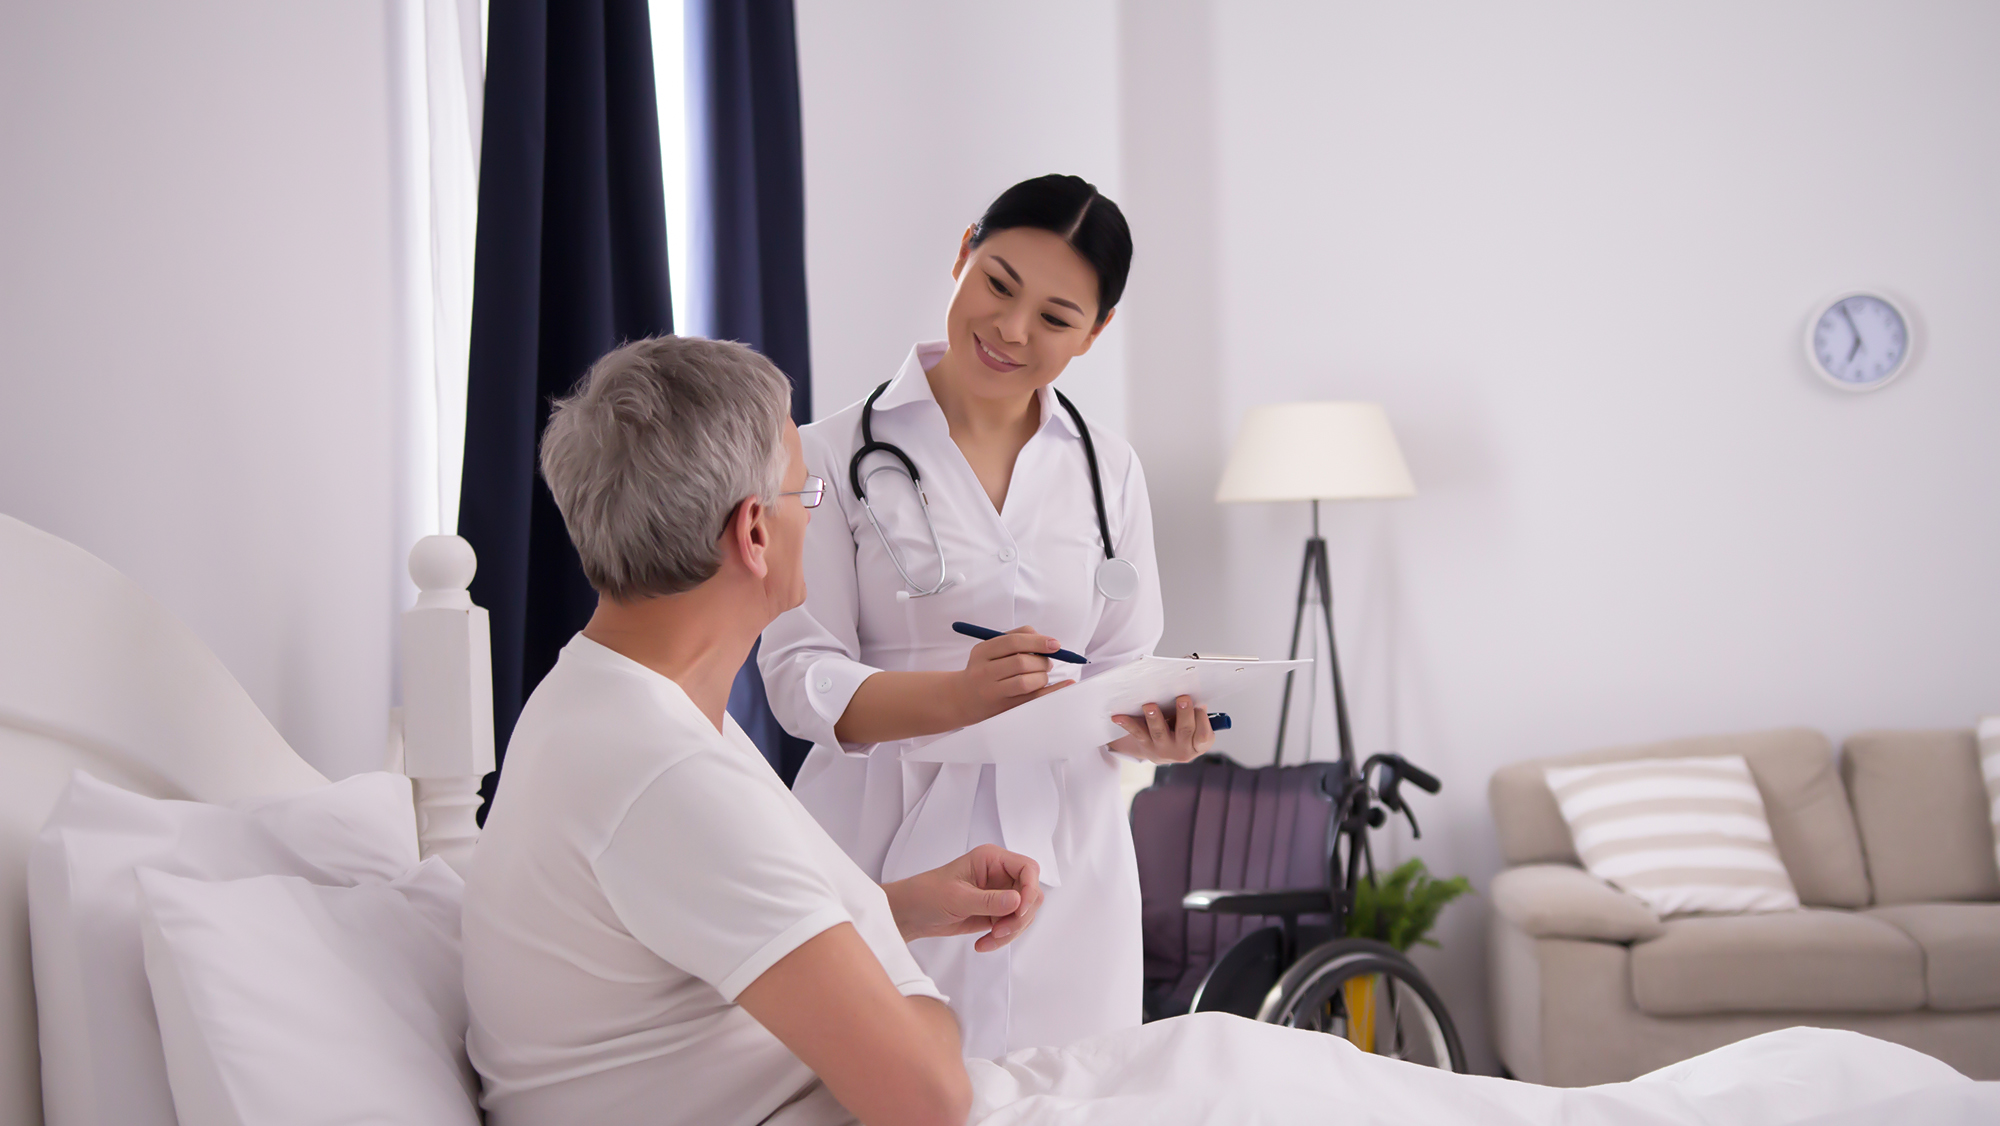 Essential Tips for Landing a Private Duty Nursing Job